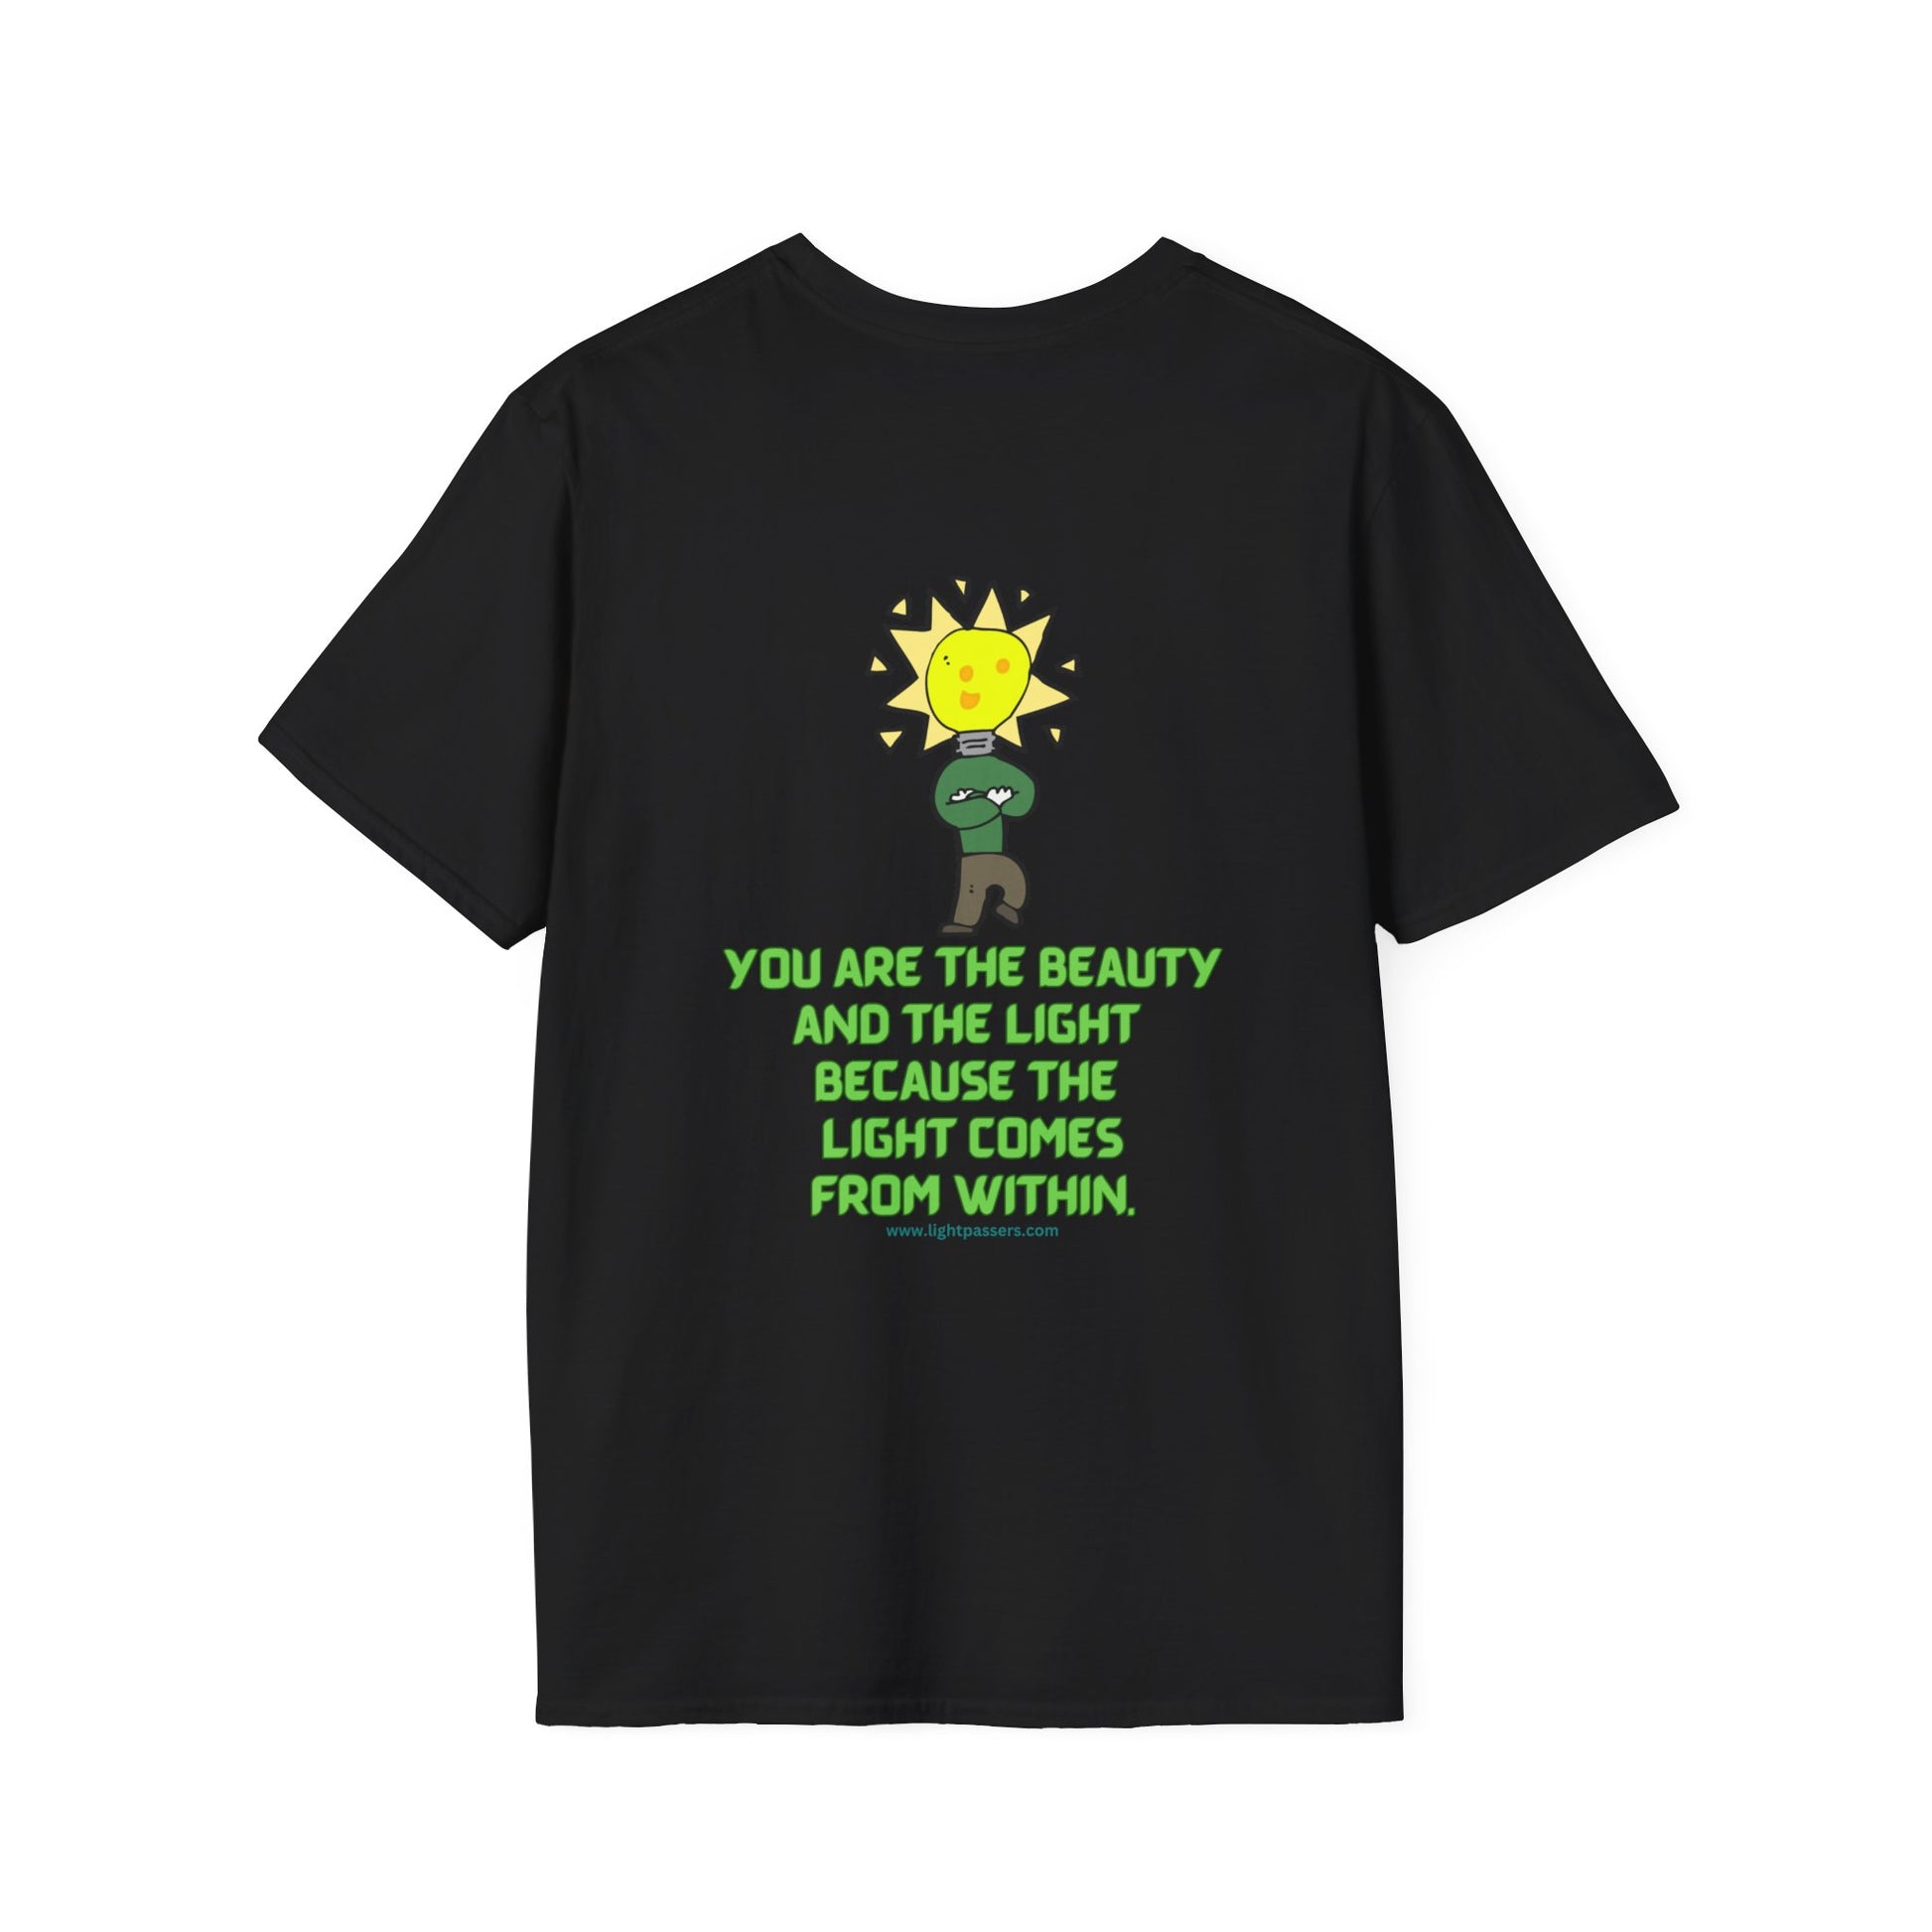 Unisex black tee with green text, light bulb cartoon, and plant design. 100% cotton, no side seams, tear-away label, classic fit.